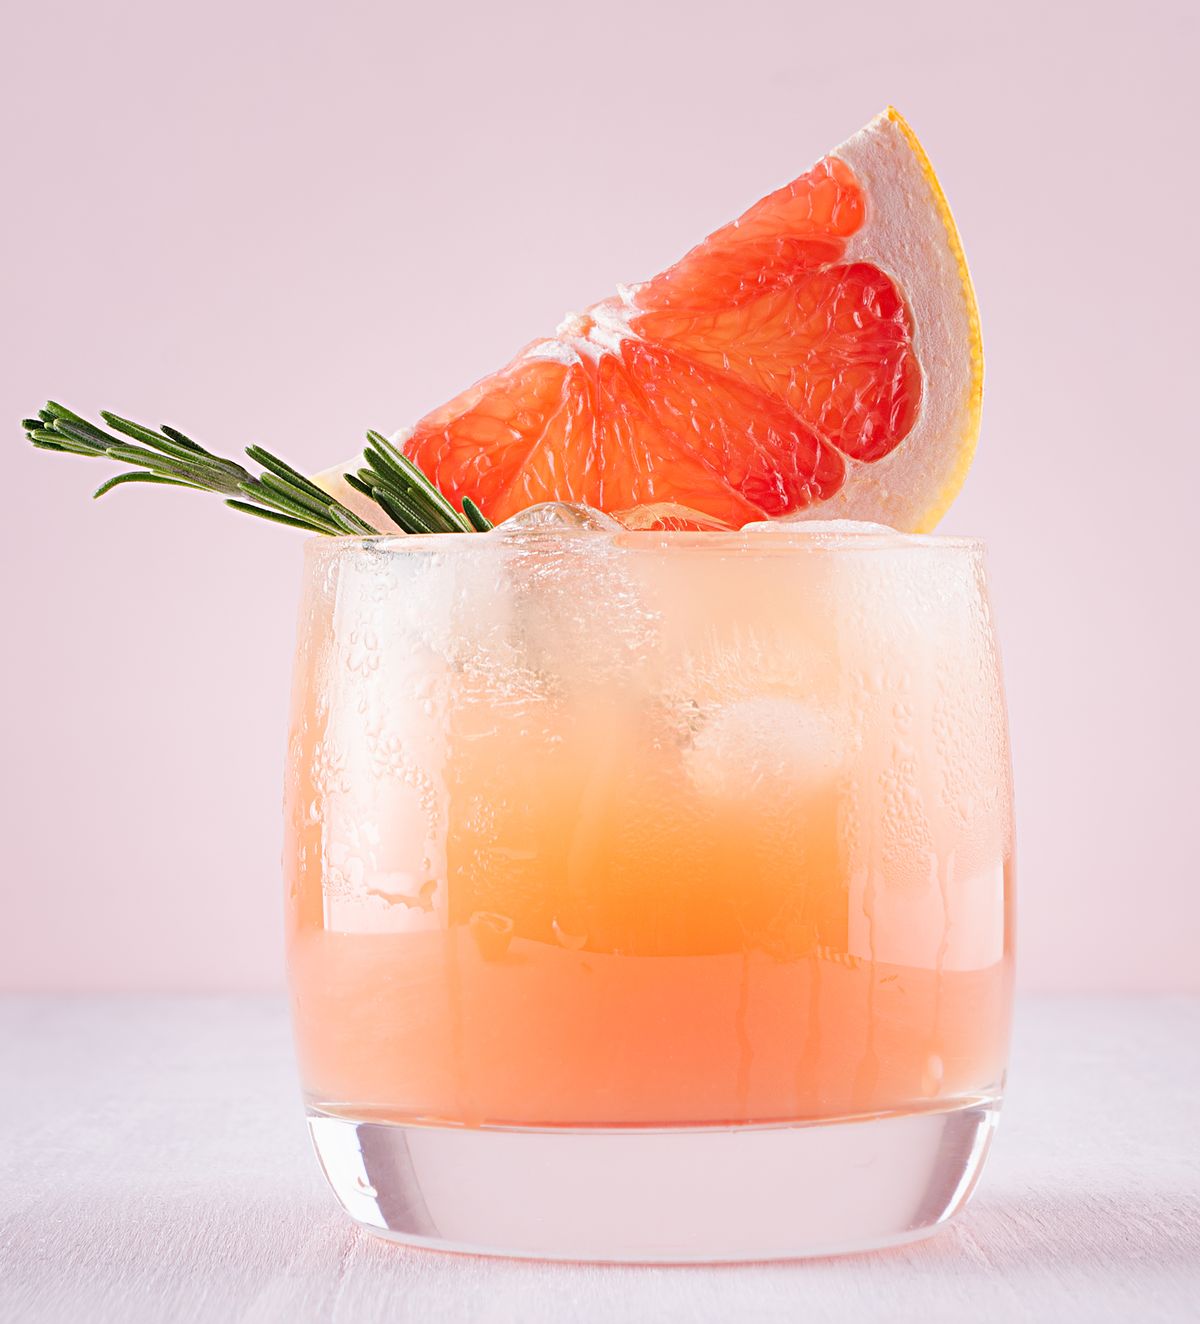 cold detox cocktail of grapefruit juice with ice, rosemary, slices citrus on soft light pink and white background